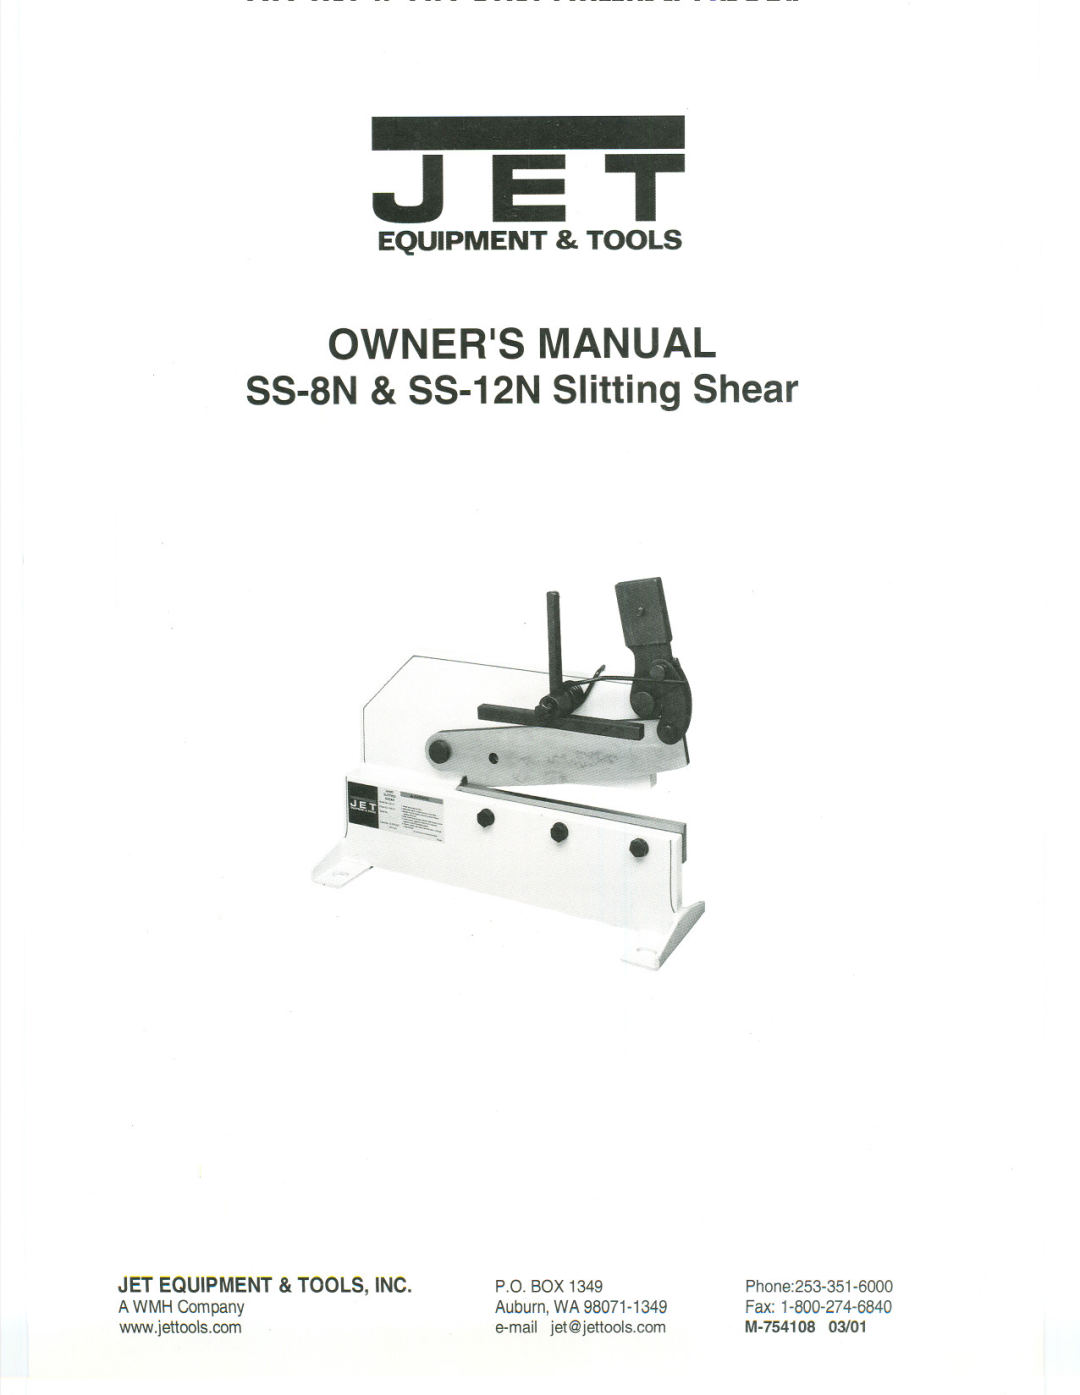 Jet Tools manual Jet Equipment & Tools, Inc, OWNER1S MANUAL, ss-aN& SS-12N Slitting Shear, Phone, A WMH Company, Fax 